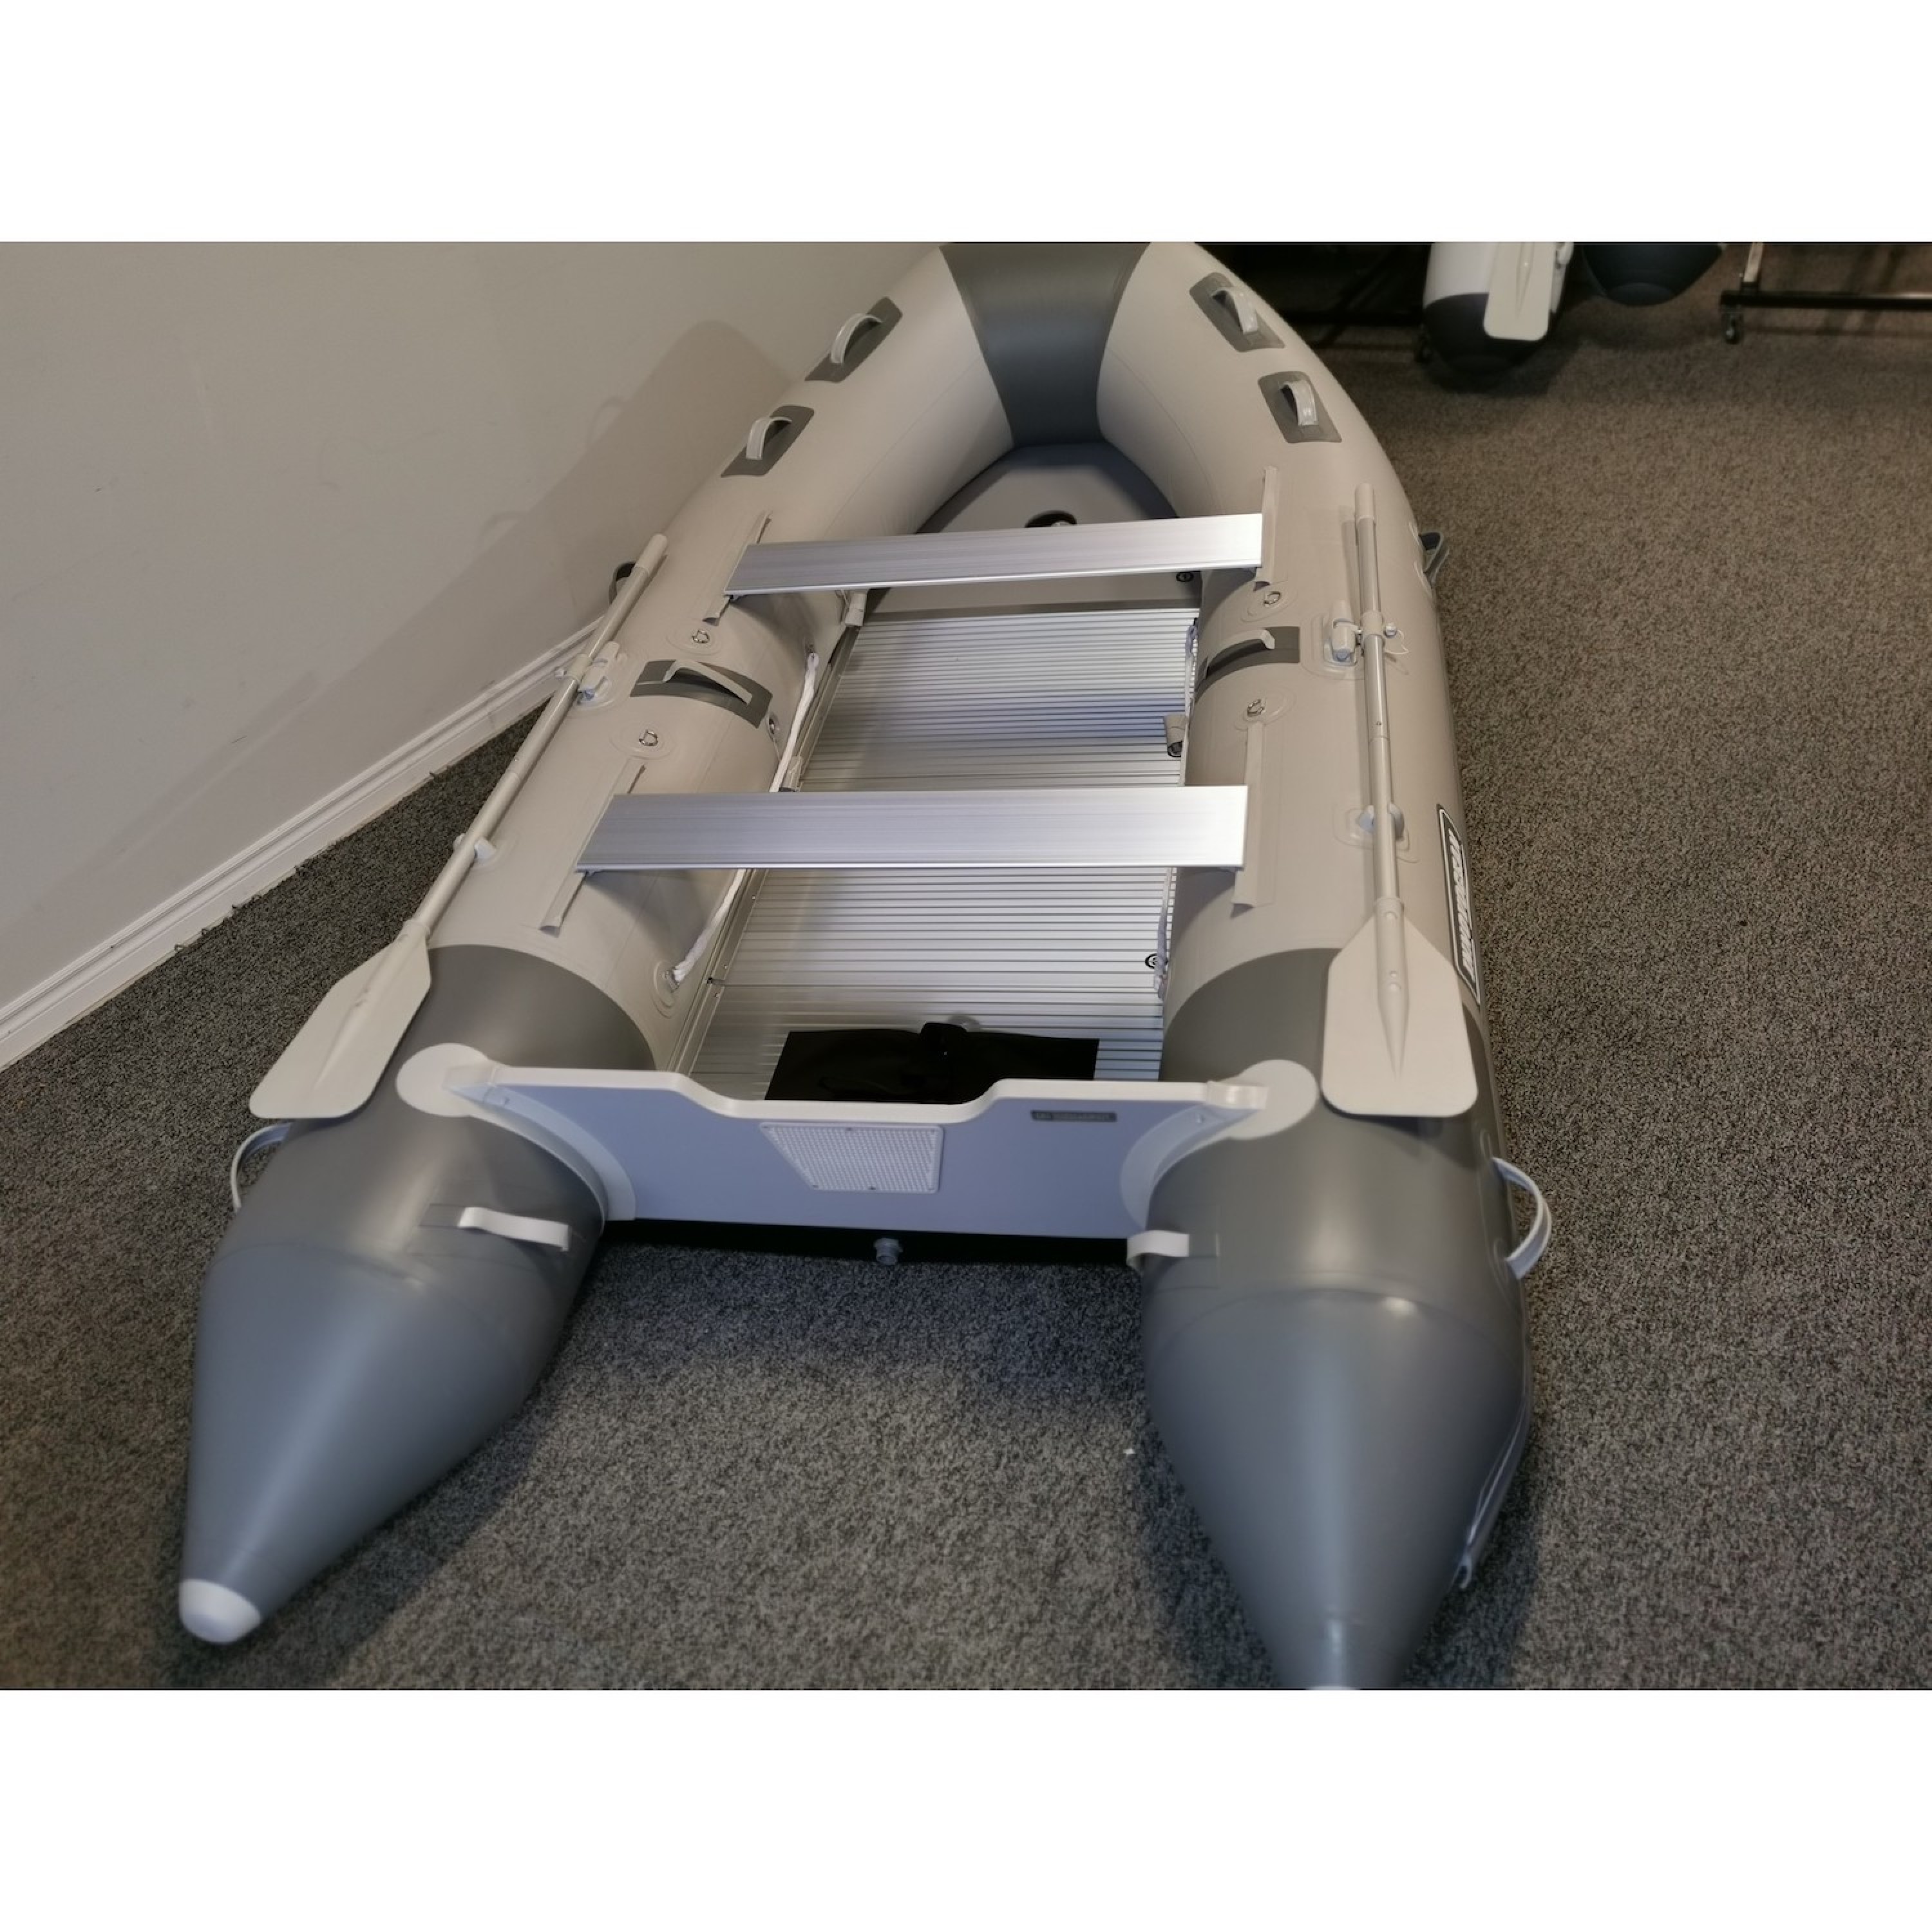 OS360B 12ft Osprey Basic Series Inflatable Boat